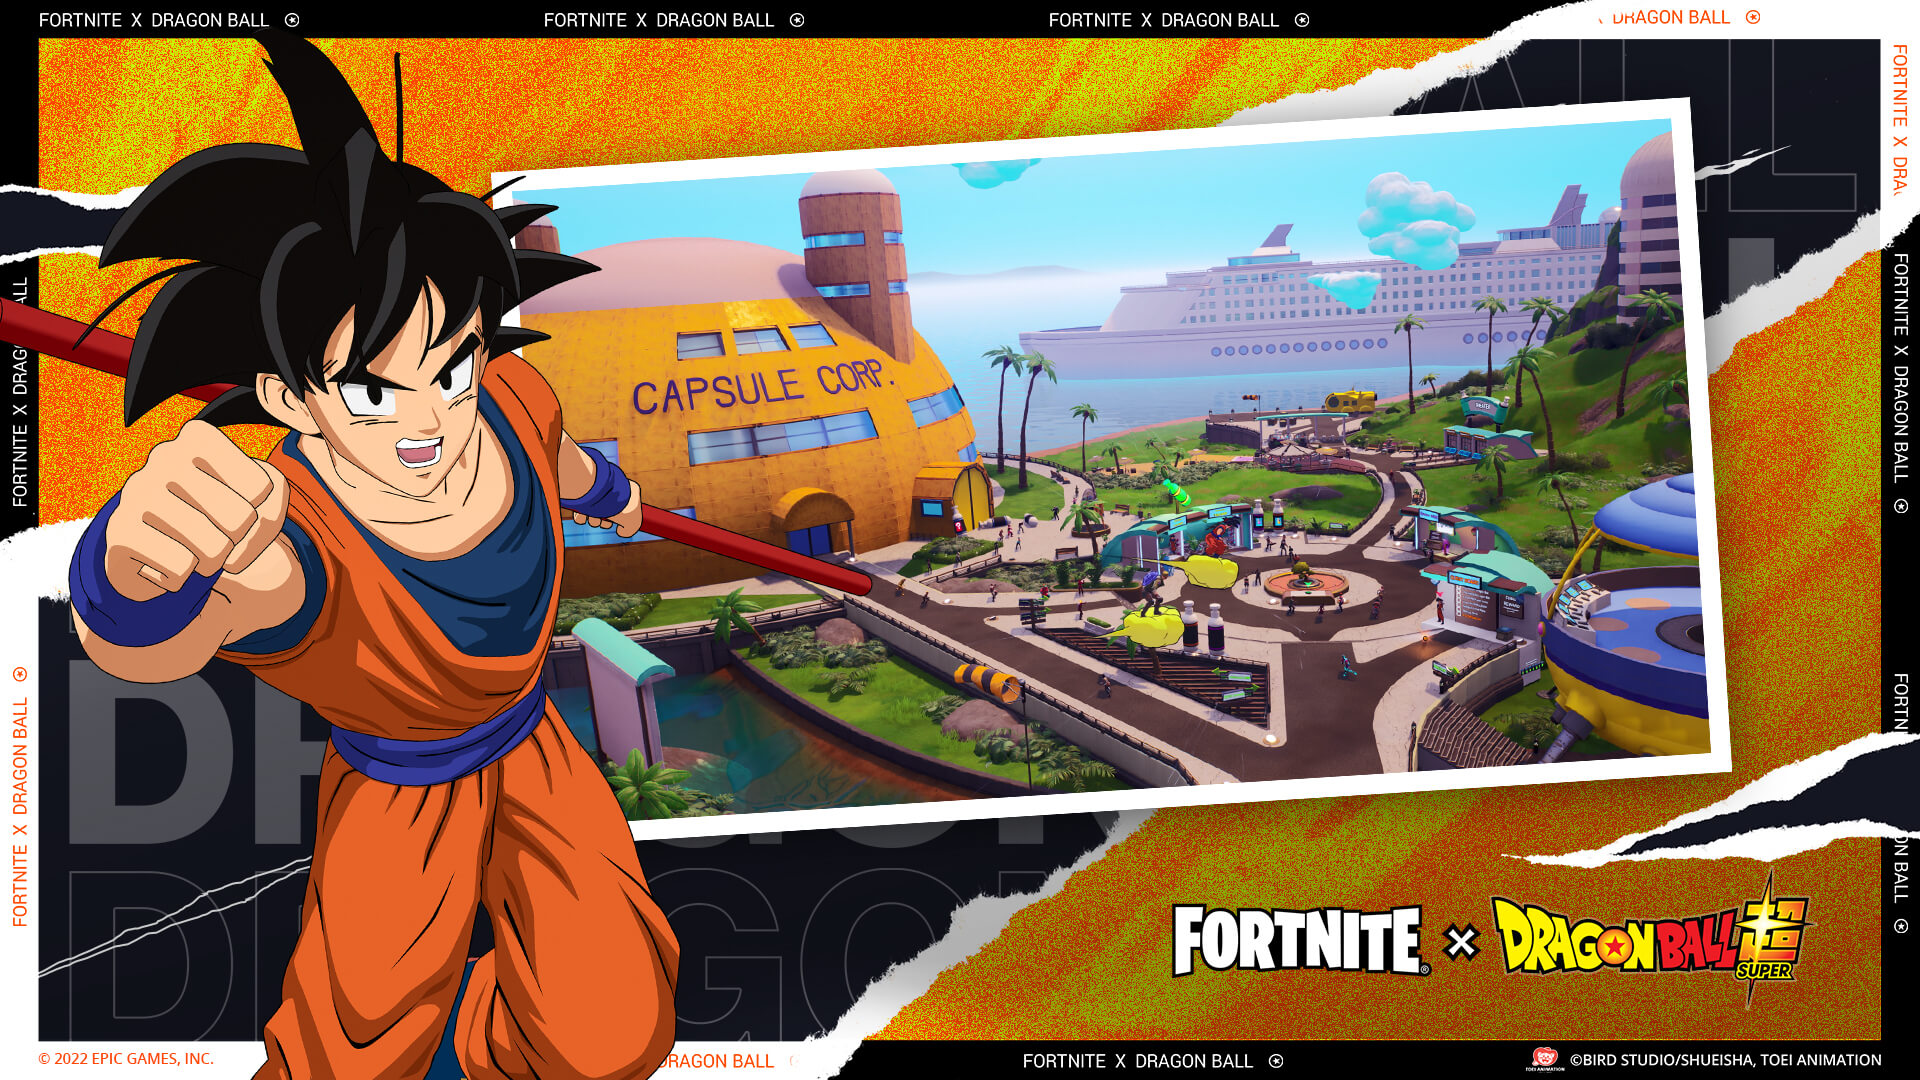 Dragon Ball is officially coming to Fortnite Virtual Reality Brisbane